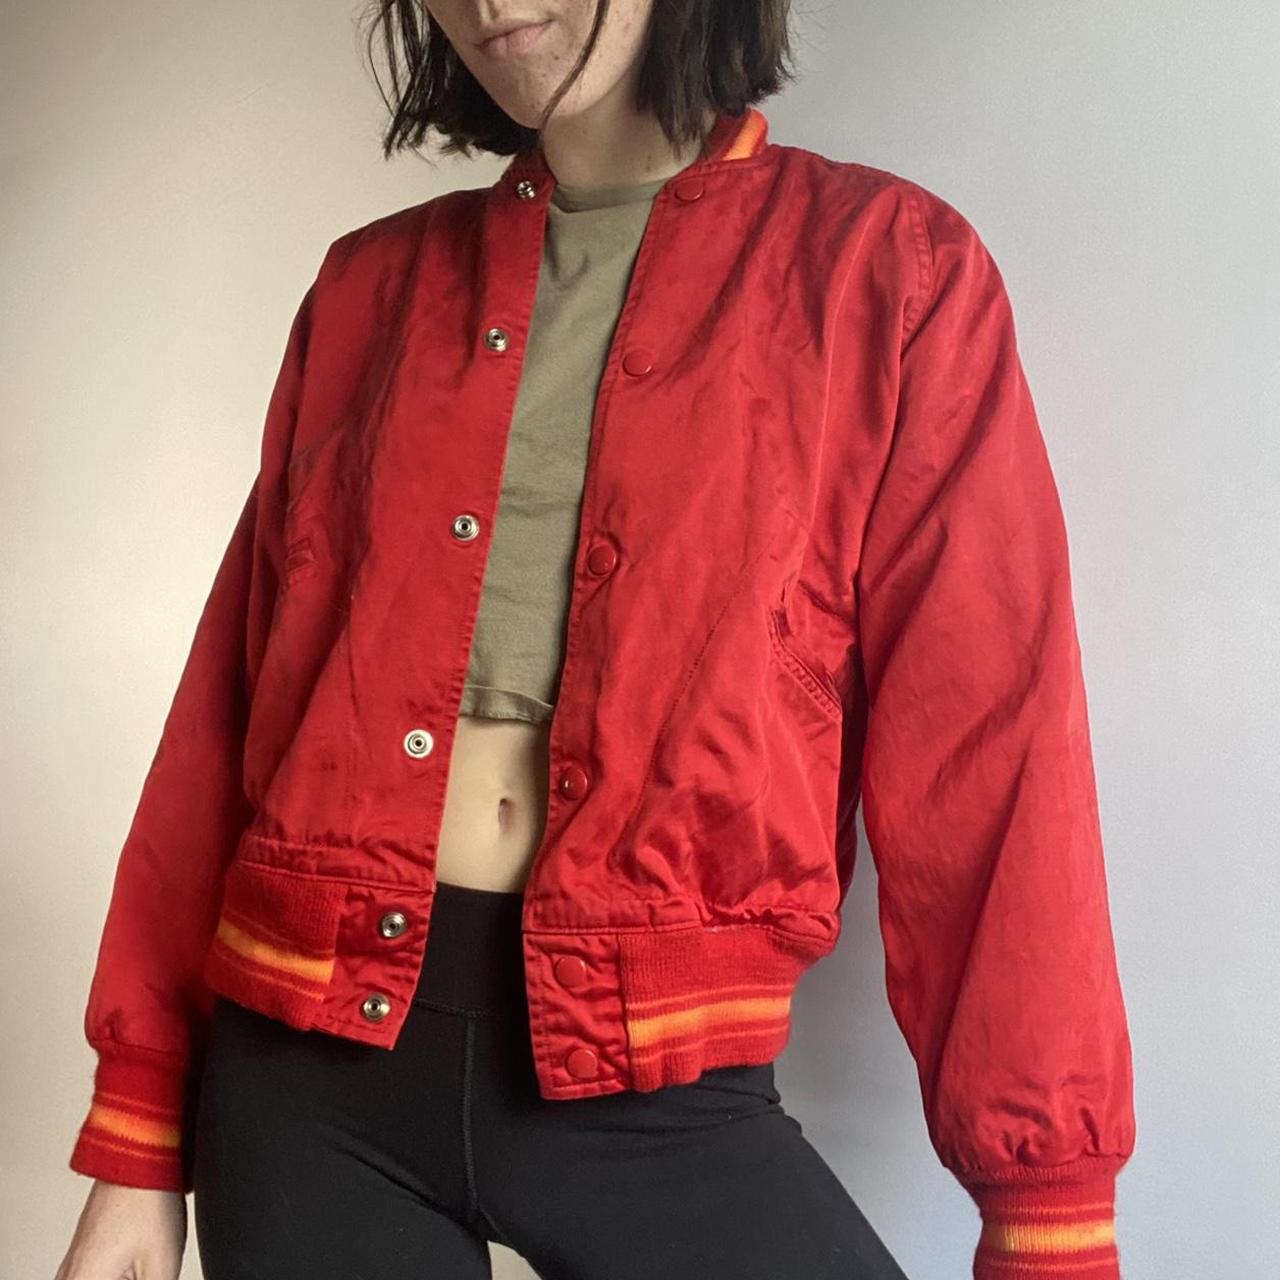 Women's Red and Yellow Jacket